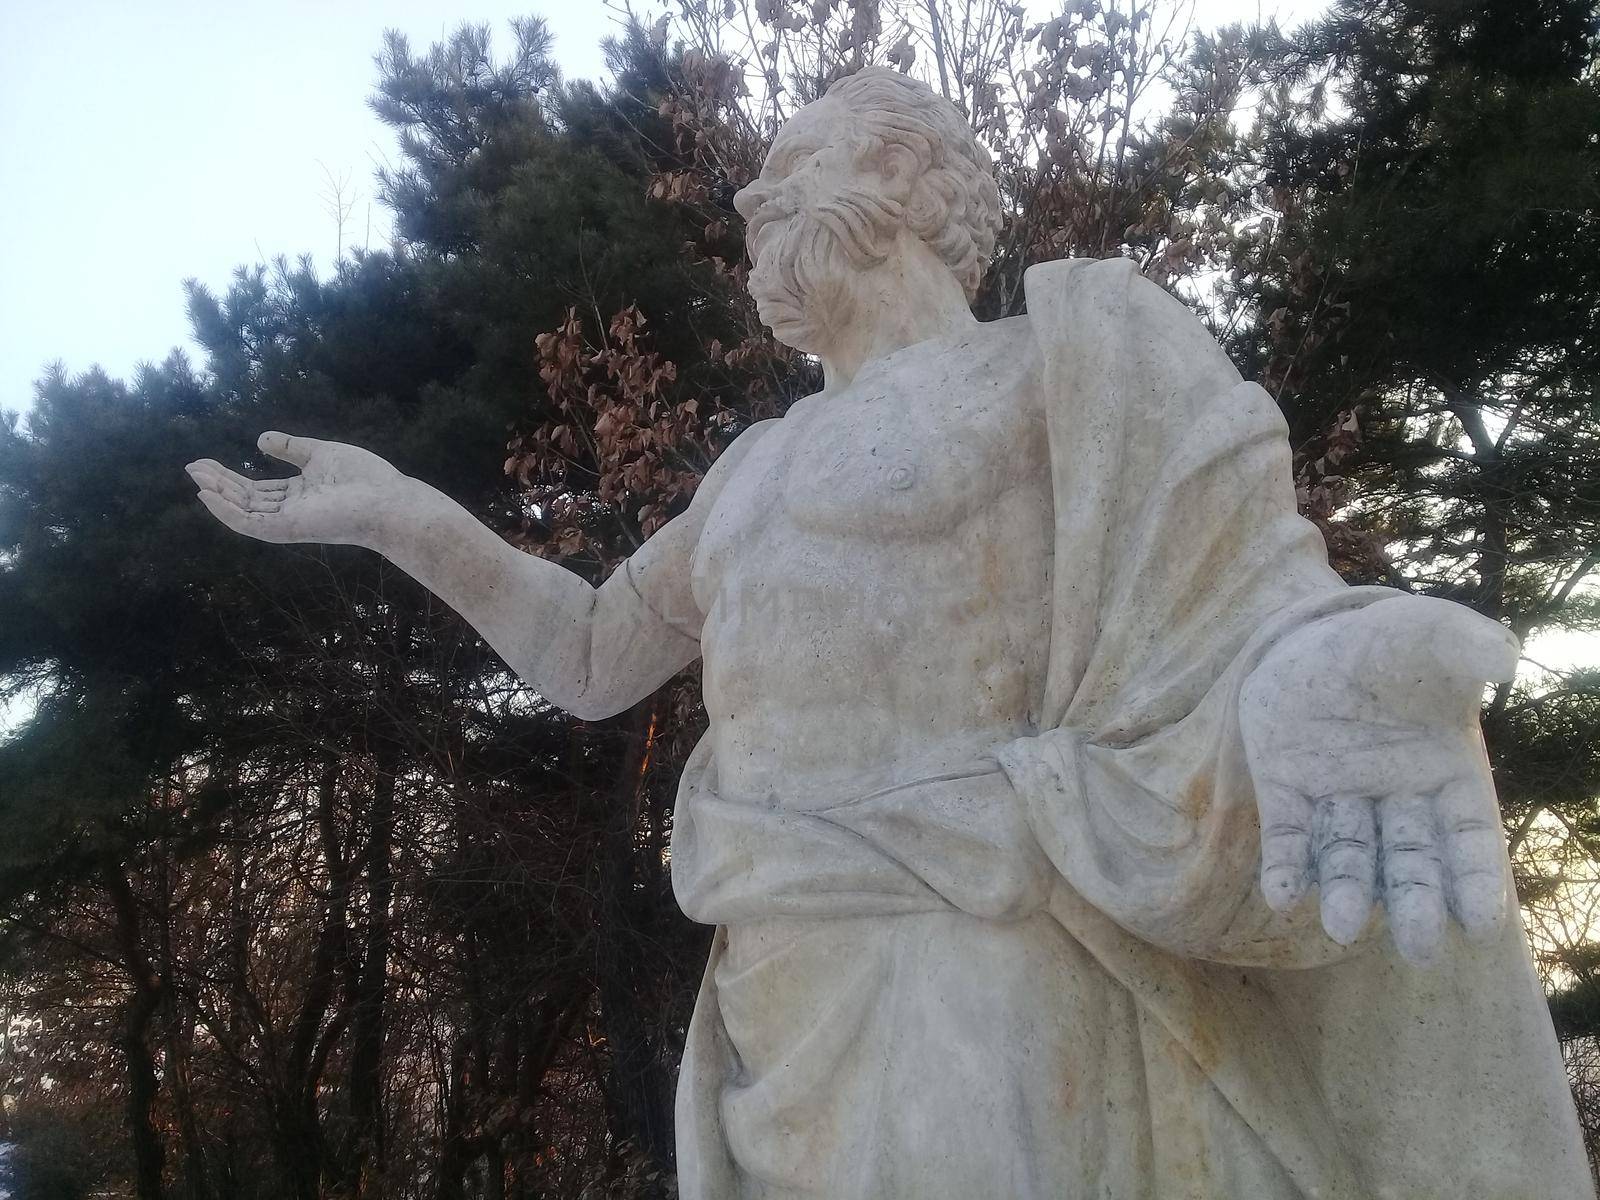 CHUNCHEON, SOUTH KOREA- February, 2018: White marble statue of Historical person with lovely stature settled in a public park